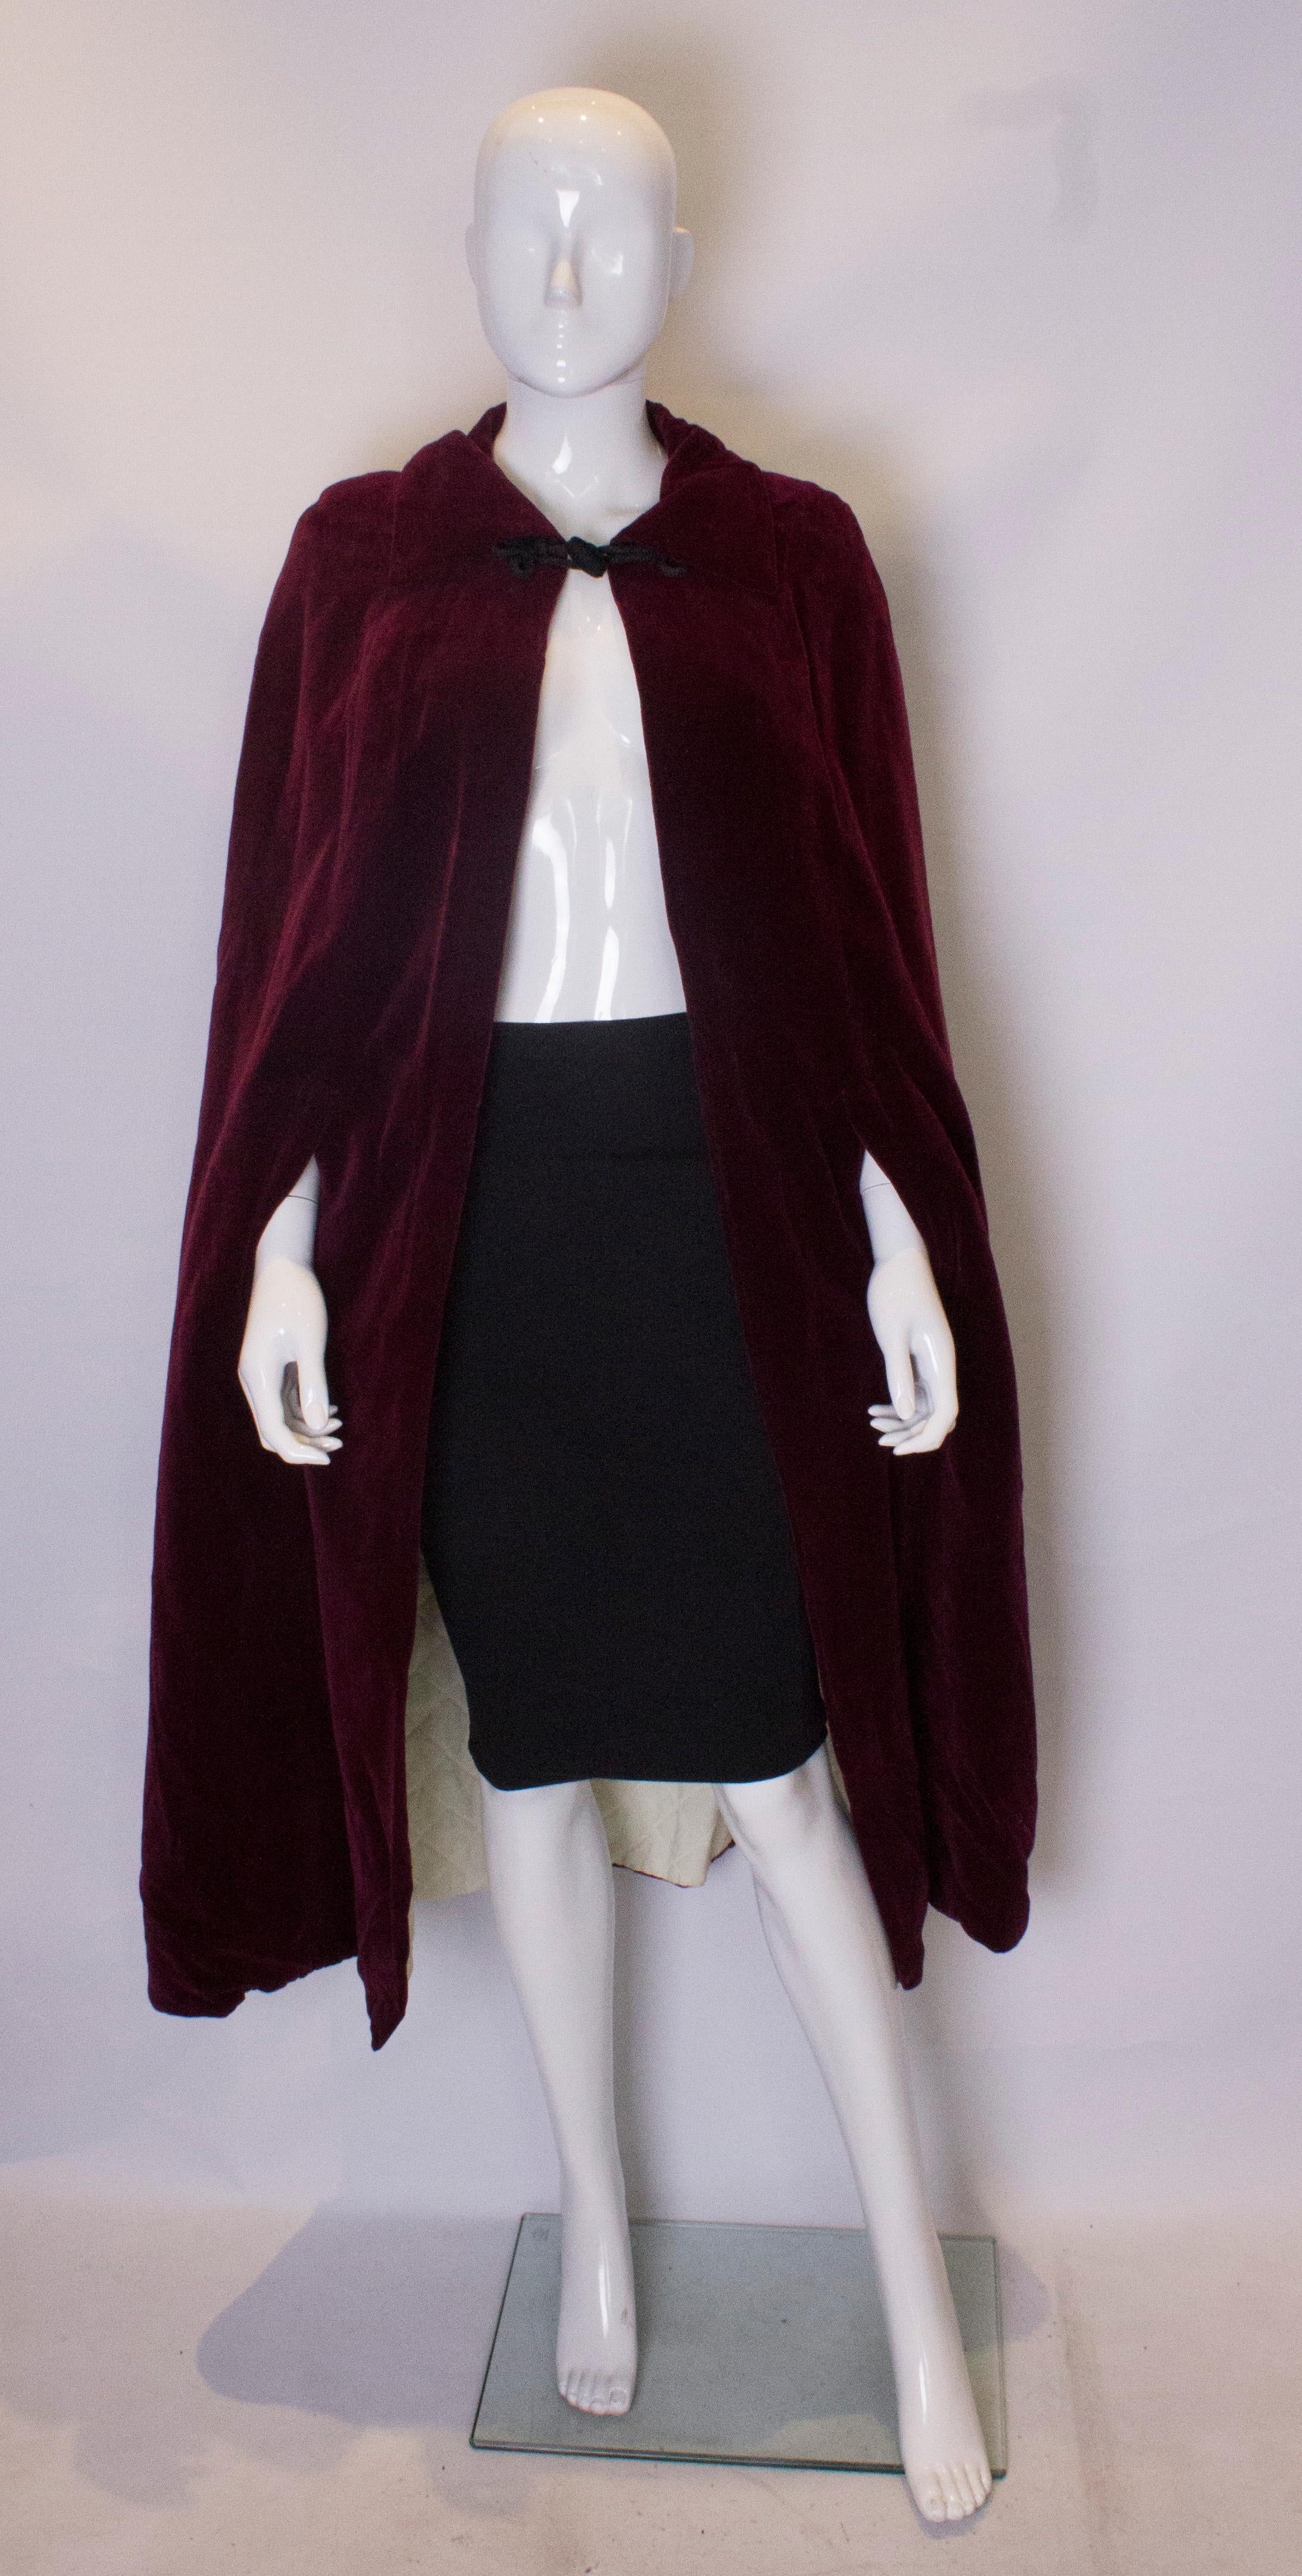 A stunning velvet cape by Quad. The cape is in a burgundy colour velvet with quilted lining. It has a hook and eye fastening at the neck and there are two arm slits lower down. Measurements : shoulder to shoulder 19'', bust up to 41', length 47''